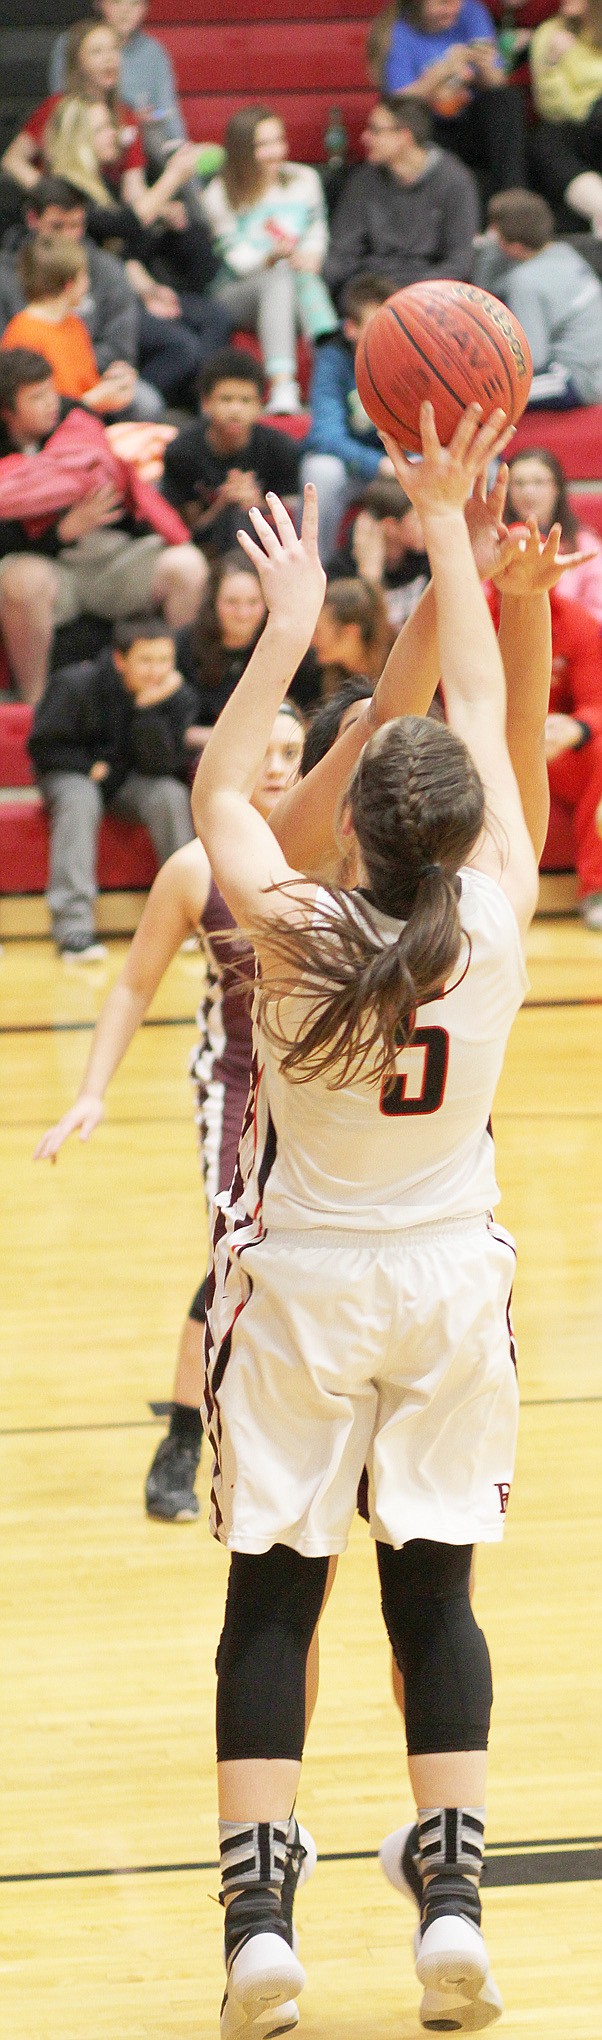 Junior Lady Blackhawk Avery Dayberry goes up for a basket during the game against the Lady Pioneers Friday.